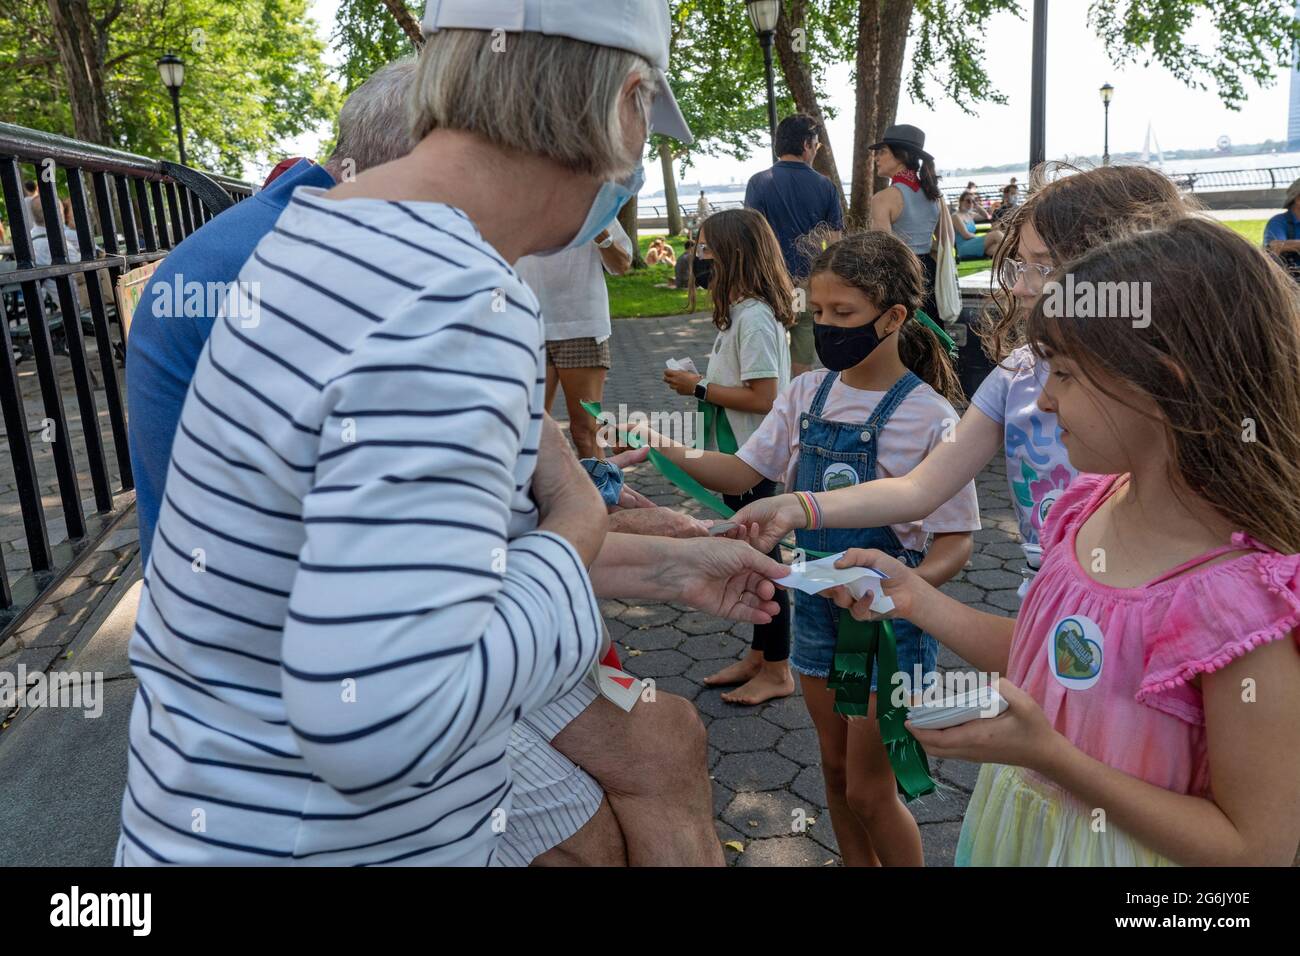 NEW YORK, NY – JULY 05: Children hand out stickers and green ribbons during a rally in Rockefeller Park to protest Gov. Andrew Cuomo's plans for a COV Stock Photo